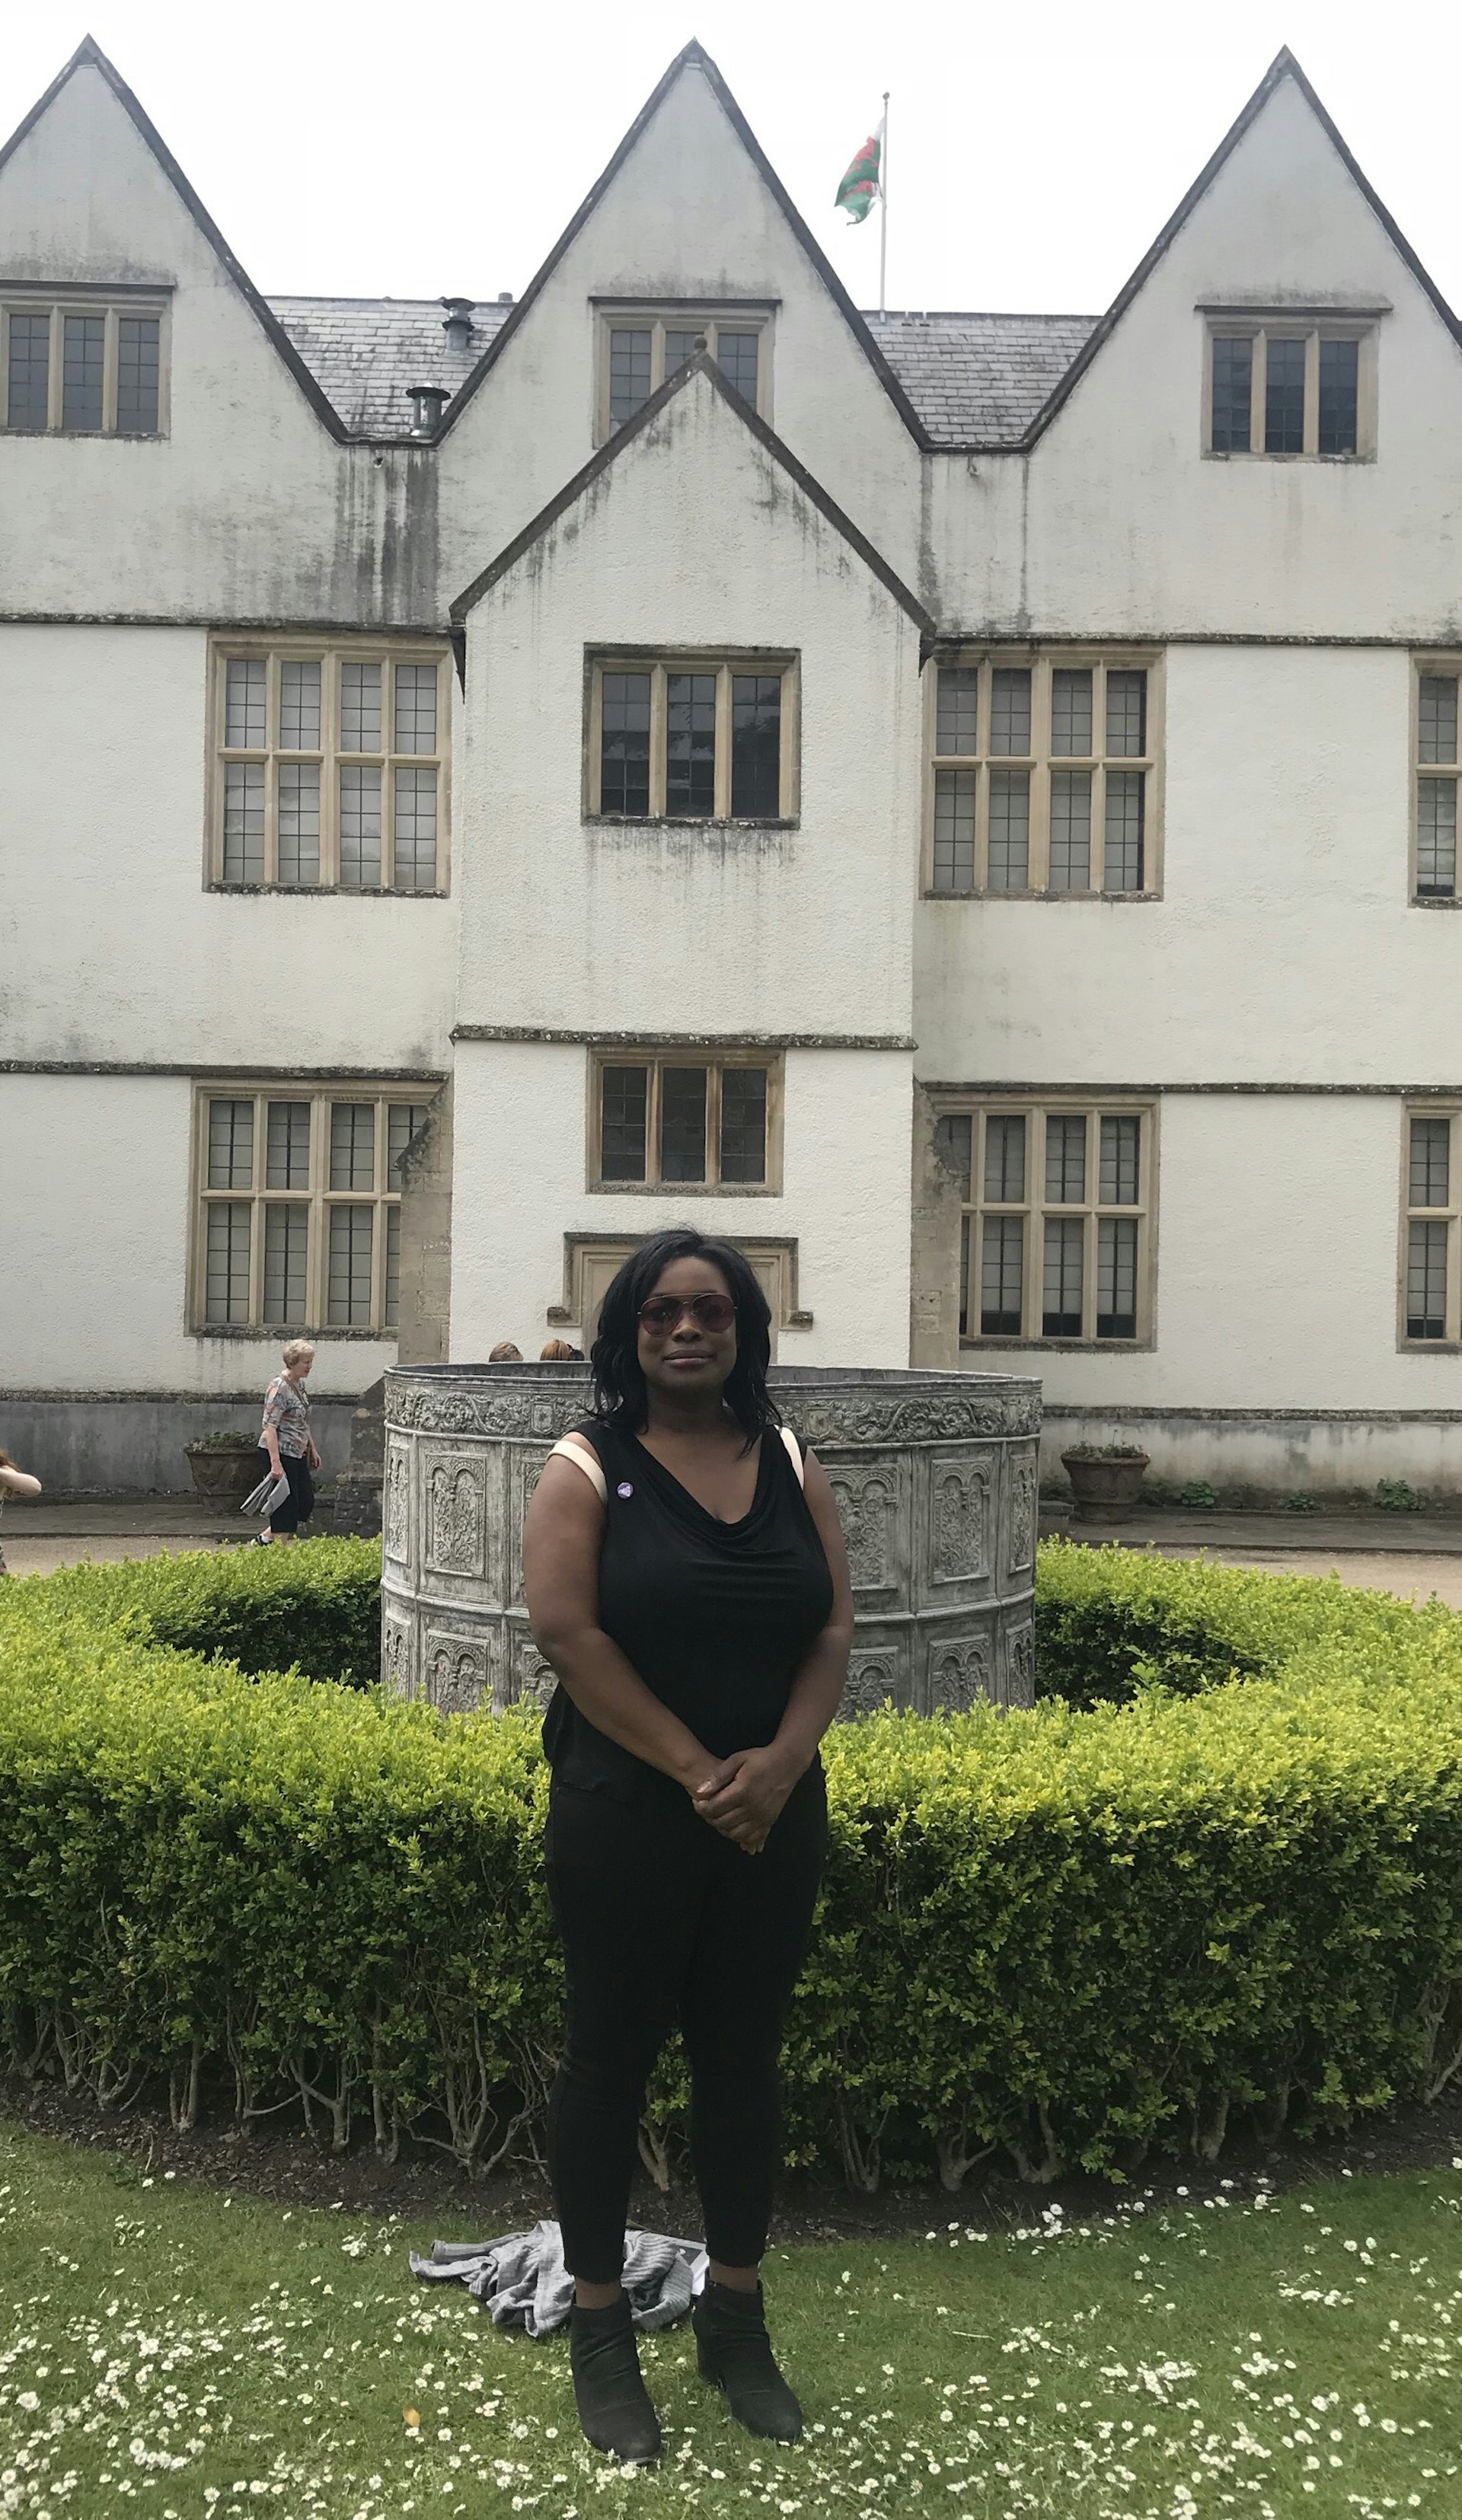 An African American woman stands in the garden at the from of St. Fagan's National Museum of History in Wales. She is wearing all black and sunglasses, standing in front of a decorative stone structure, surrounded by a green hedge. The museum in the background is painted a pale yellow, has a peaked roof and a welsh flag flying.